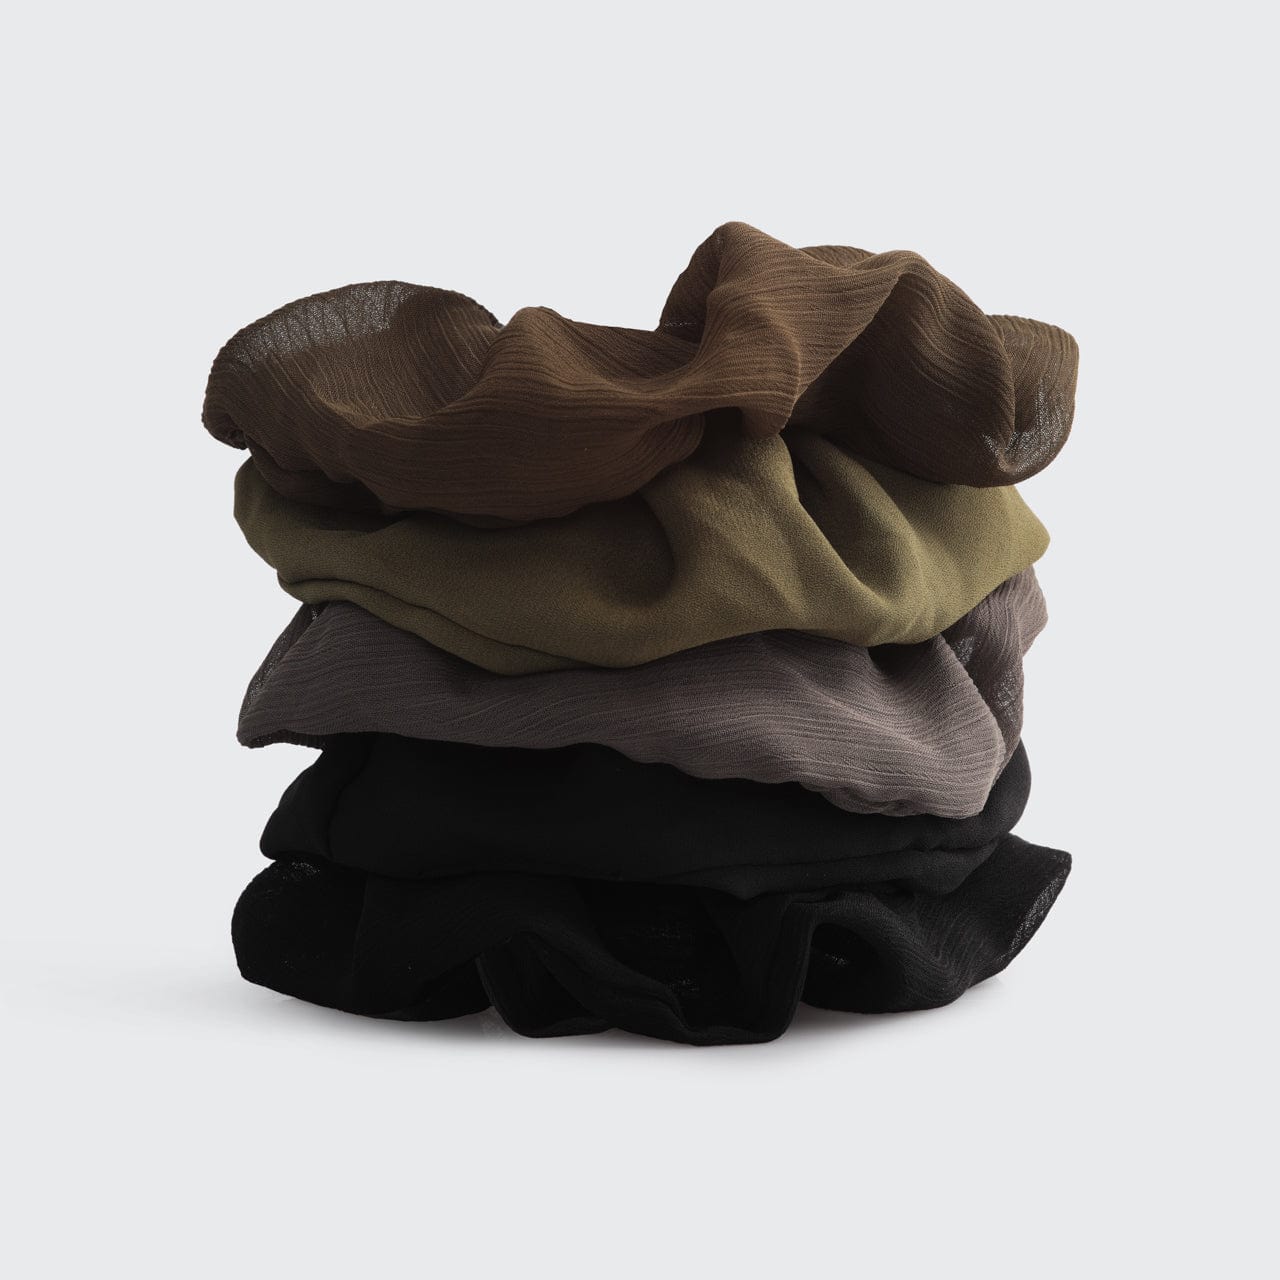 a stack of clothes on a white background